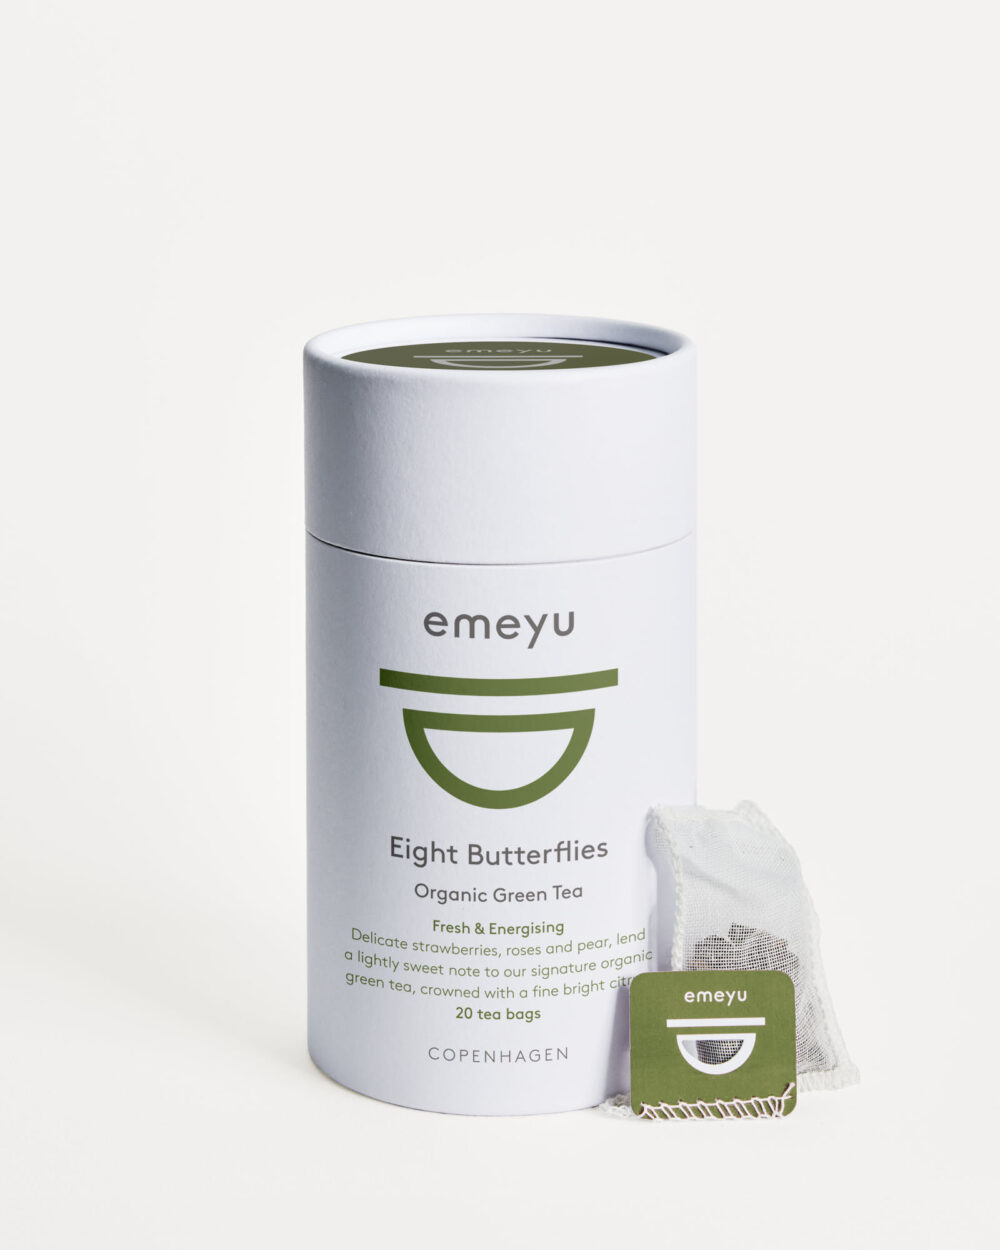 Eight Butterflies is an organic award winning premium green tea in a bag with 20 hand sewn cotton teabags in a tube.